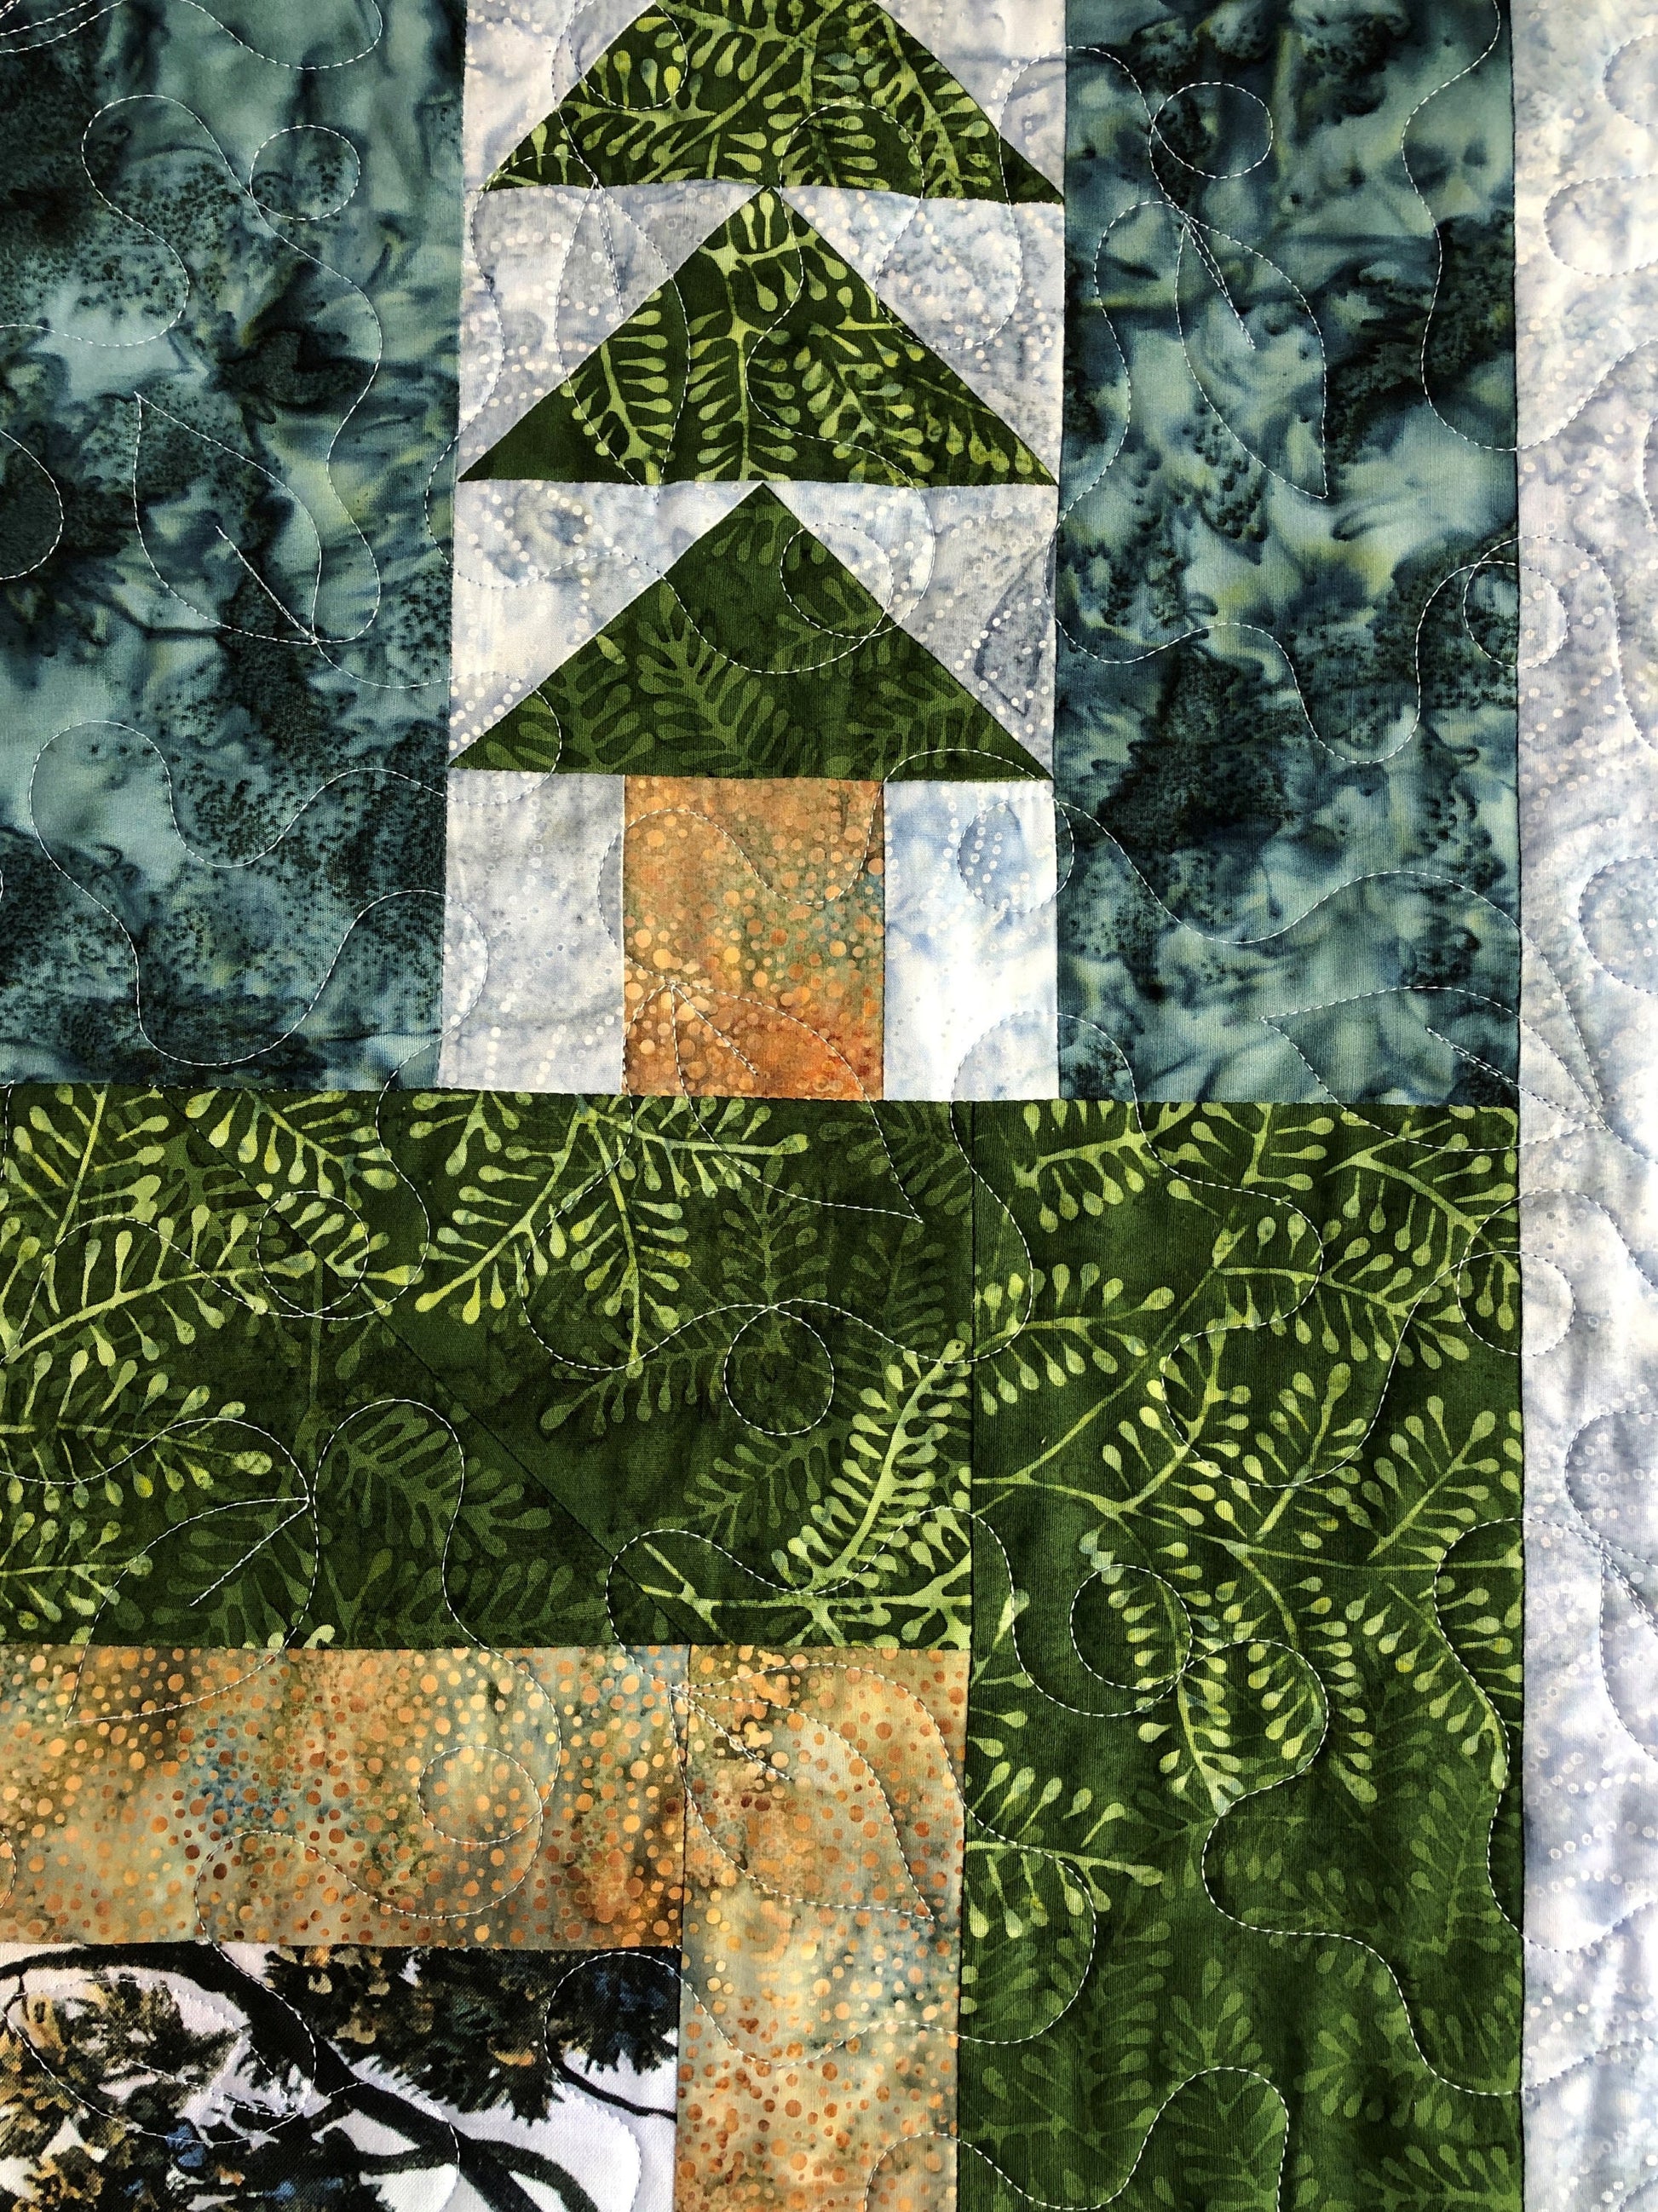 Deer Quilt, Roaming the Mountain Plains, Green and Blue, Lap Size